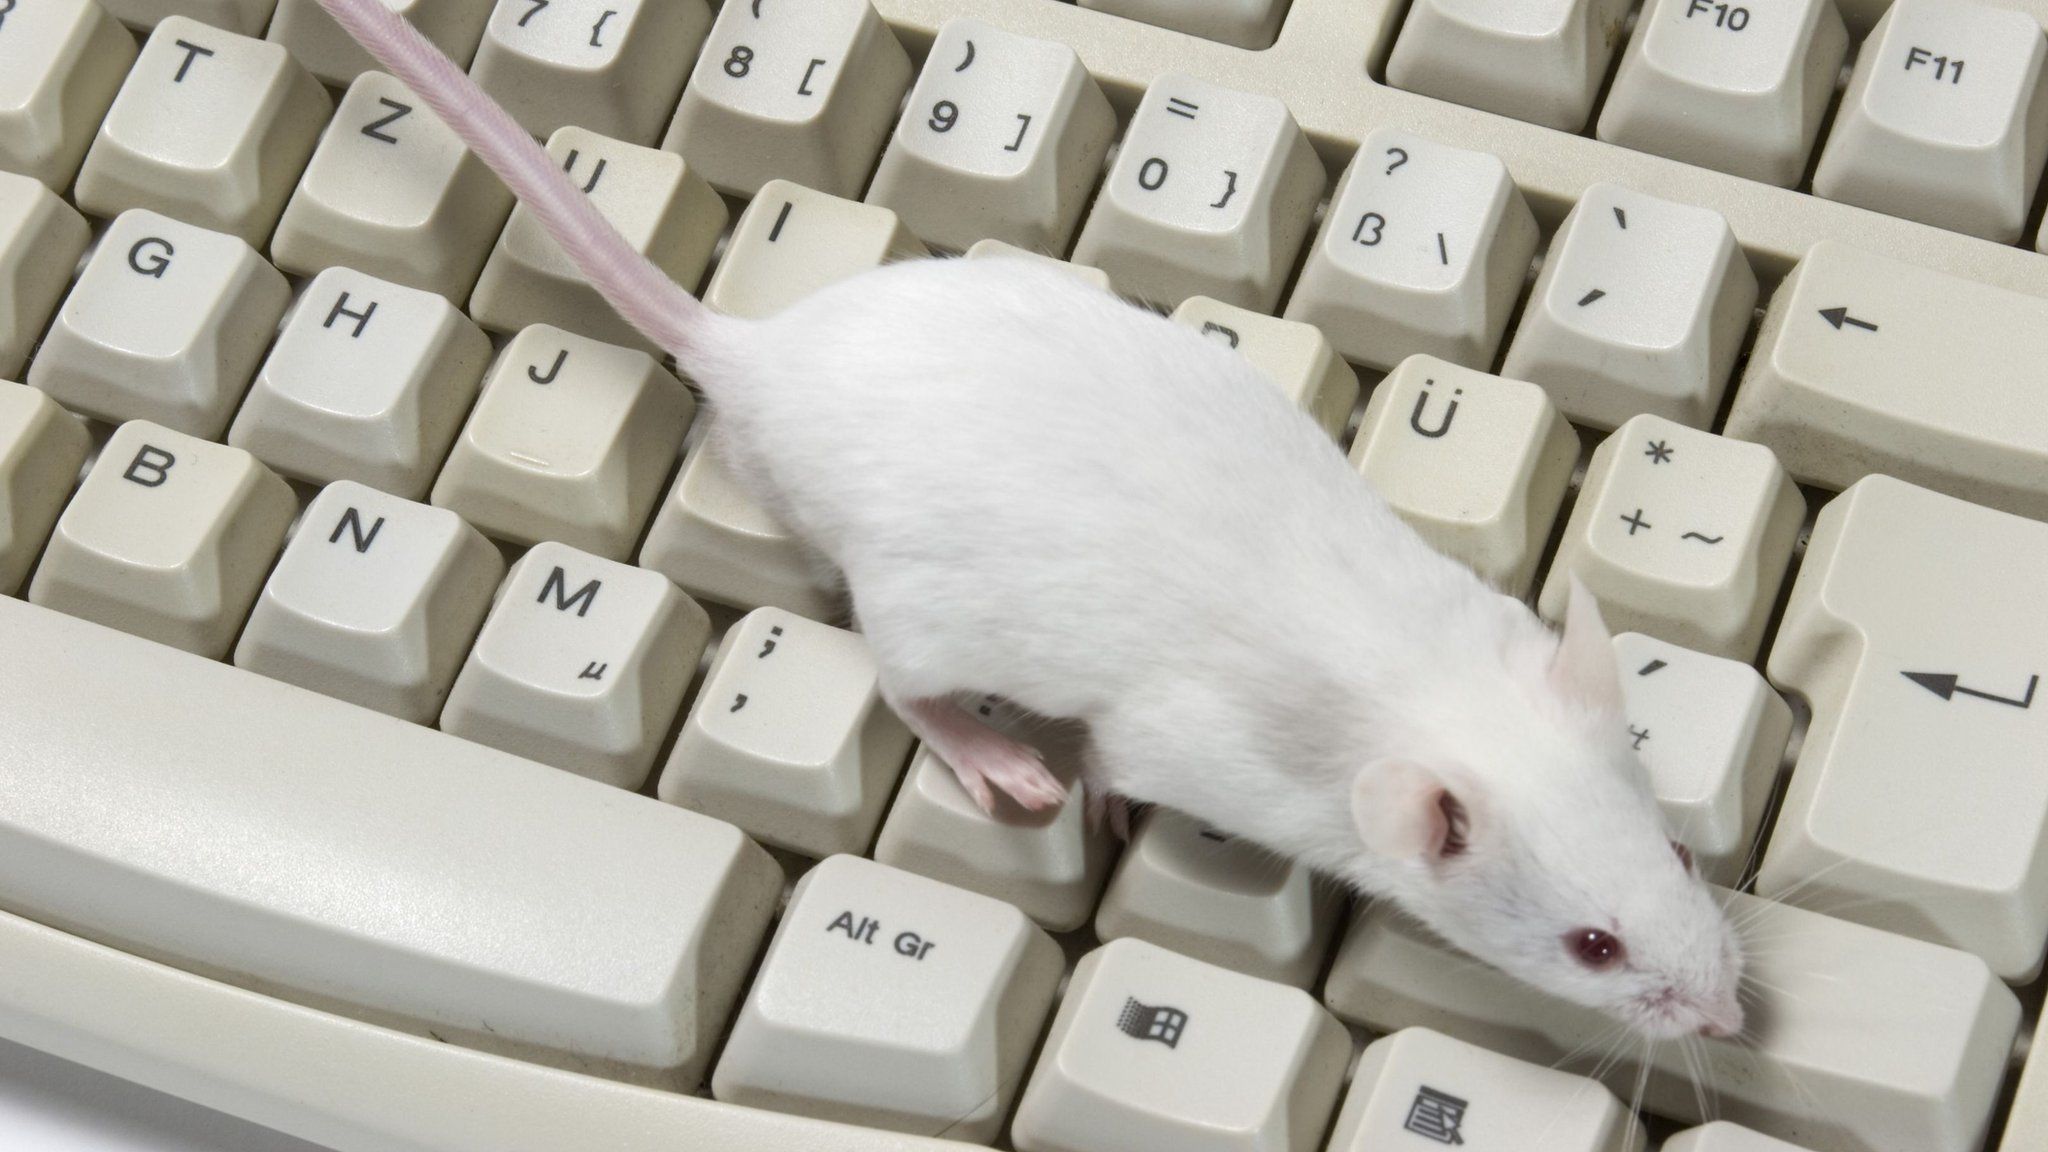 Researchers hope mice may be able to hear irregularities the human ear might miss